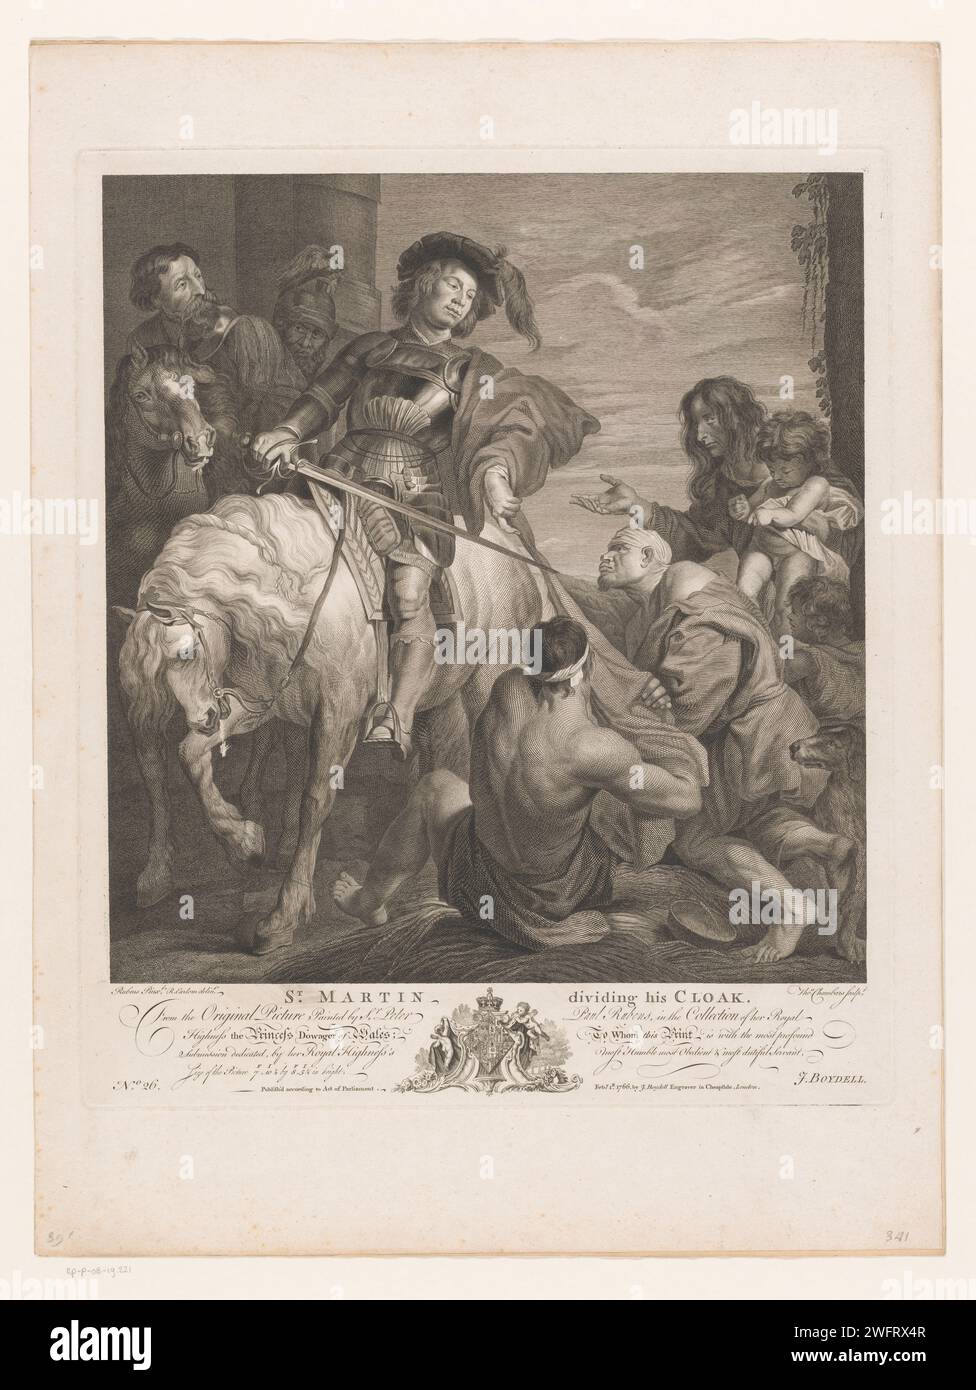 Sint Maarten gives half of his cloak to a beggar, Thomas Chamars, After Richard Earlom, After Peter Paul Rubens, After Anthony Van Dyck, 1766 print  London paper etching / engraving St. Martin divides his cloak (i.e. the charity of St. Martin): he is usually shown on horseback, cutting his cloak with his sword, or putting part of the cloak round the shoulders of a beggar who kneels beside him Stock Photo